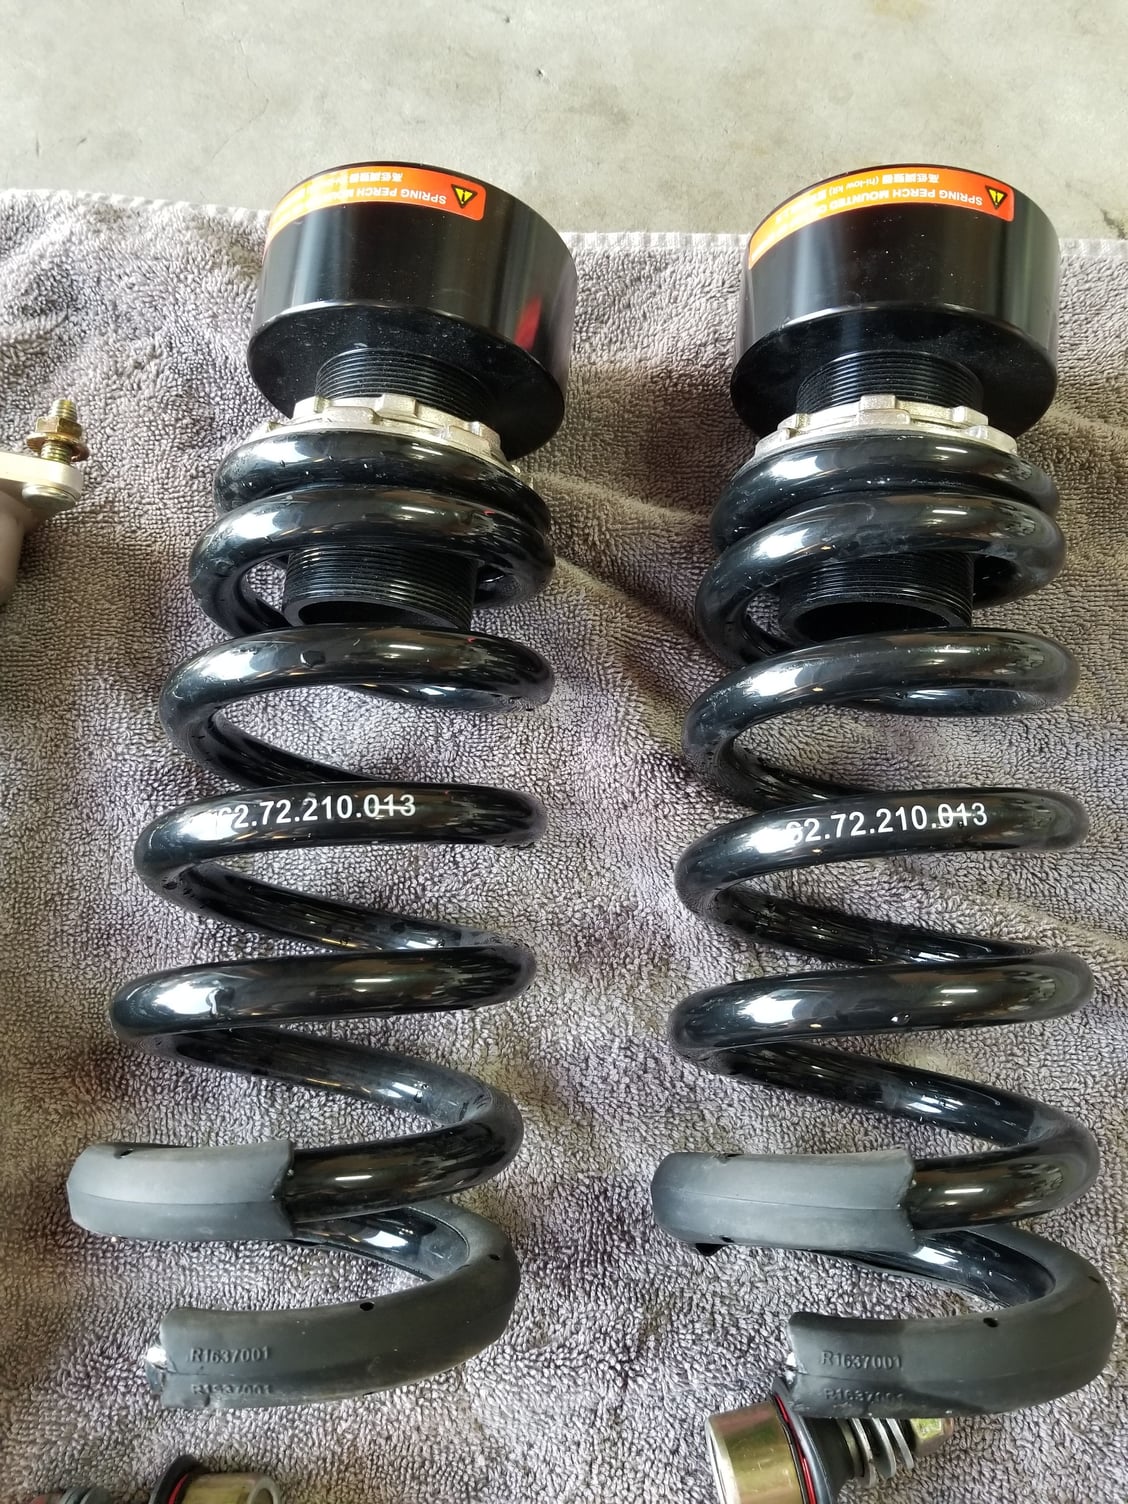 Steering/Suspension - Selling C Class W204 BC Racing Coilover - Used - 2008 to 2015 Mercedes-Benz C63 AMG - Oakland, CA 94607, United States